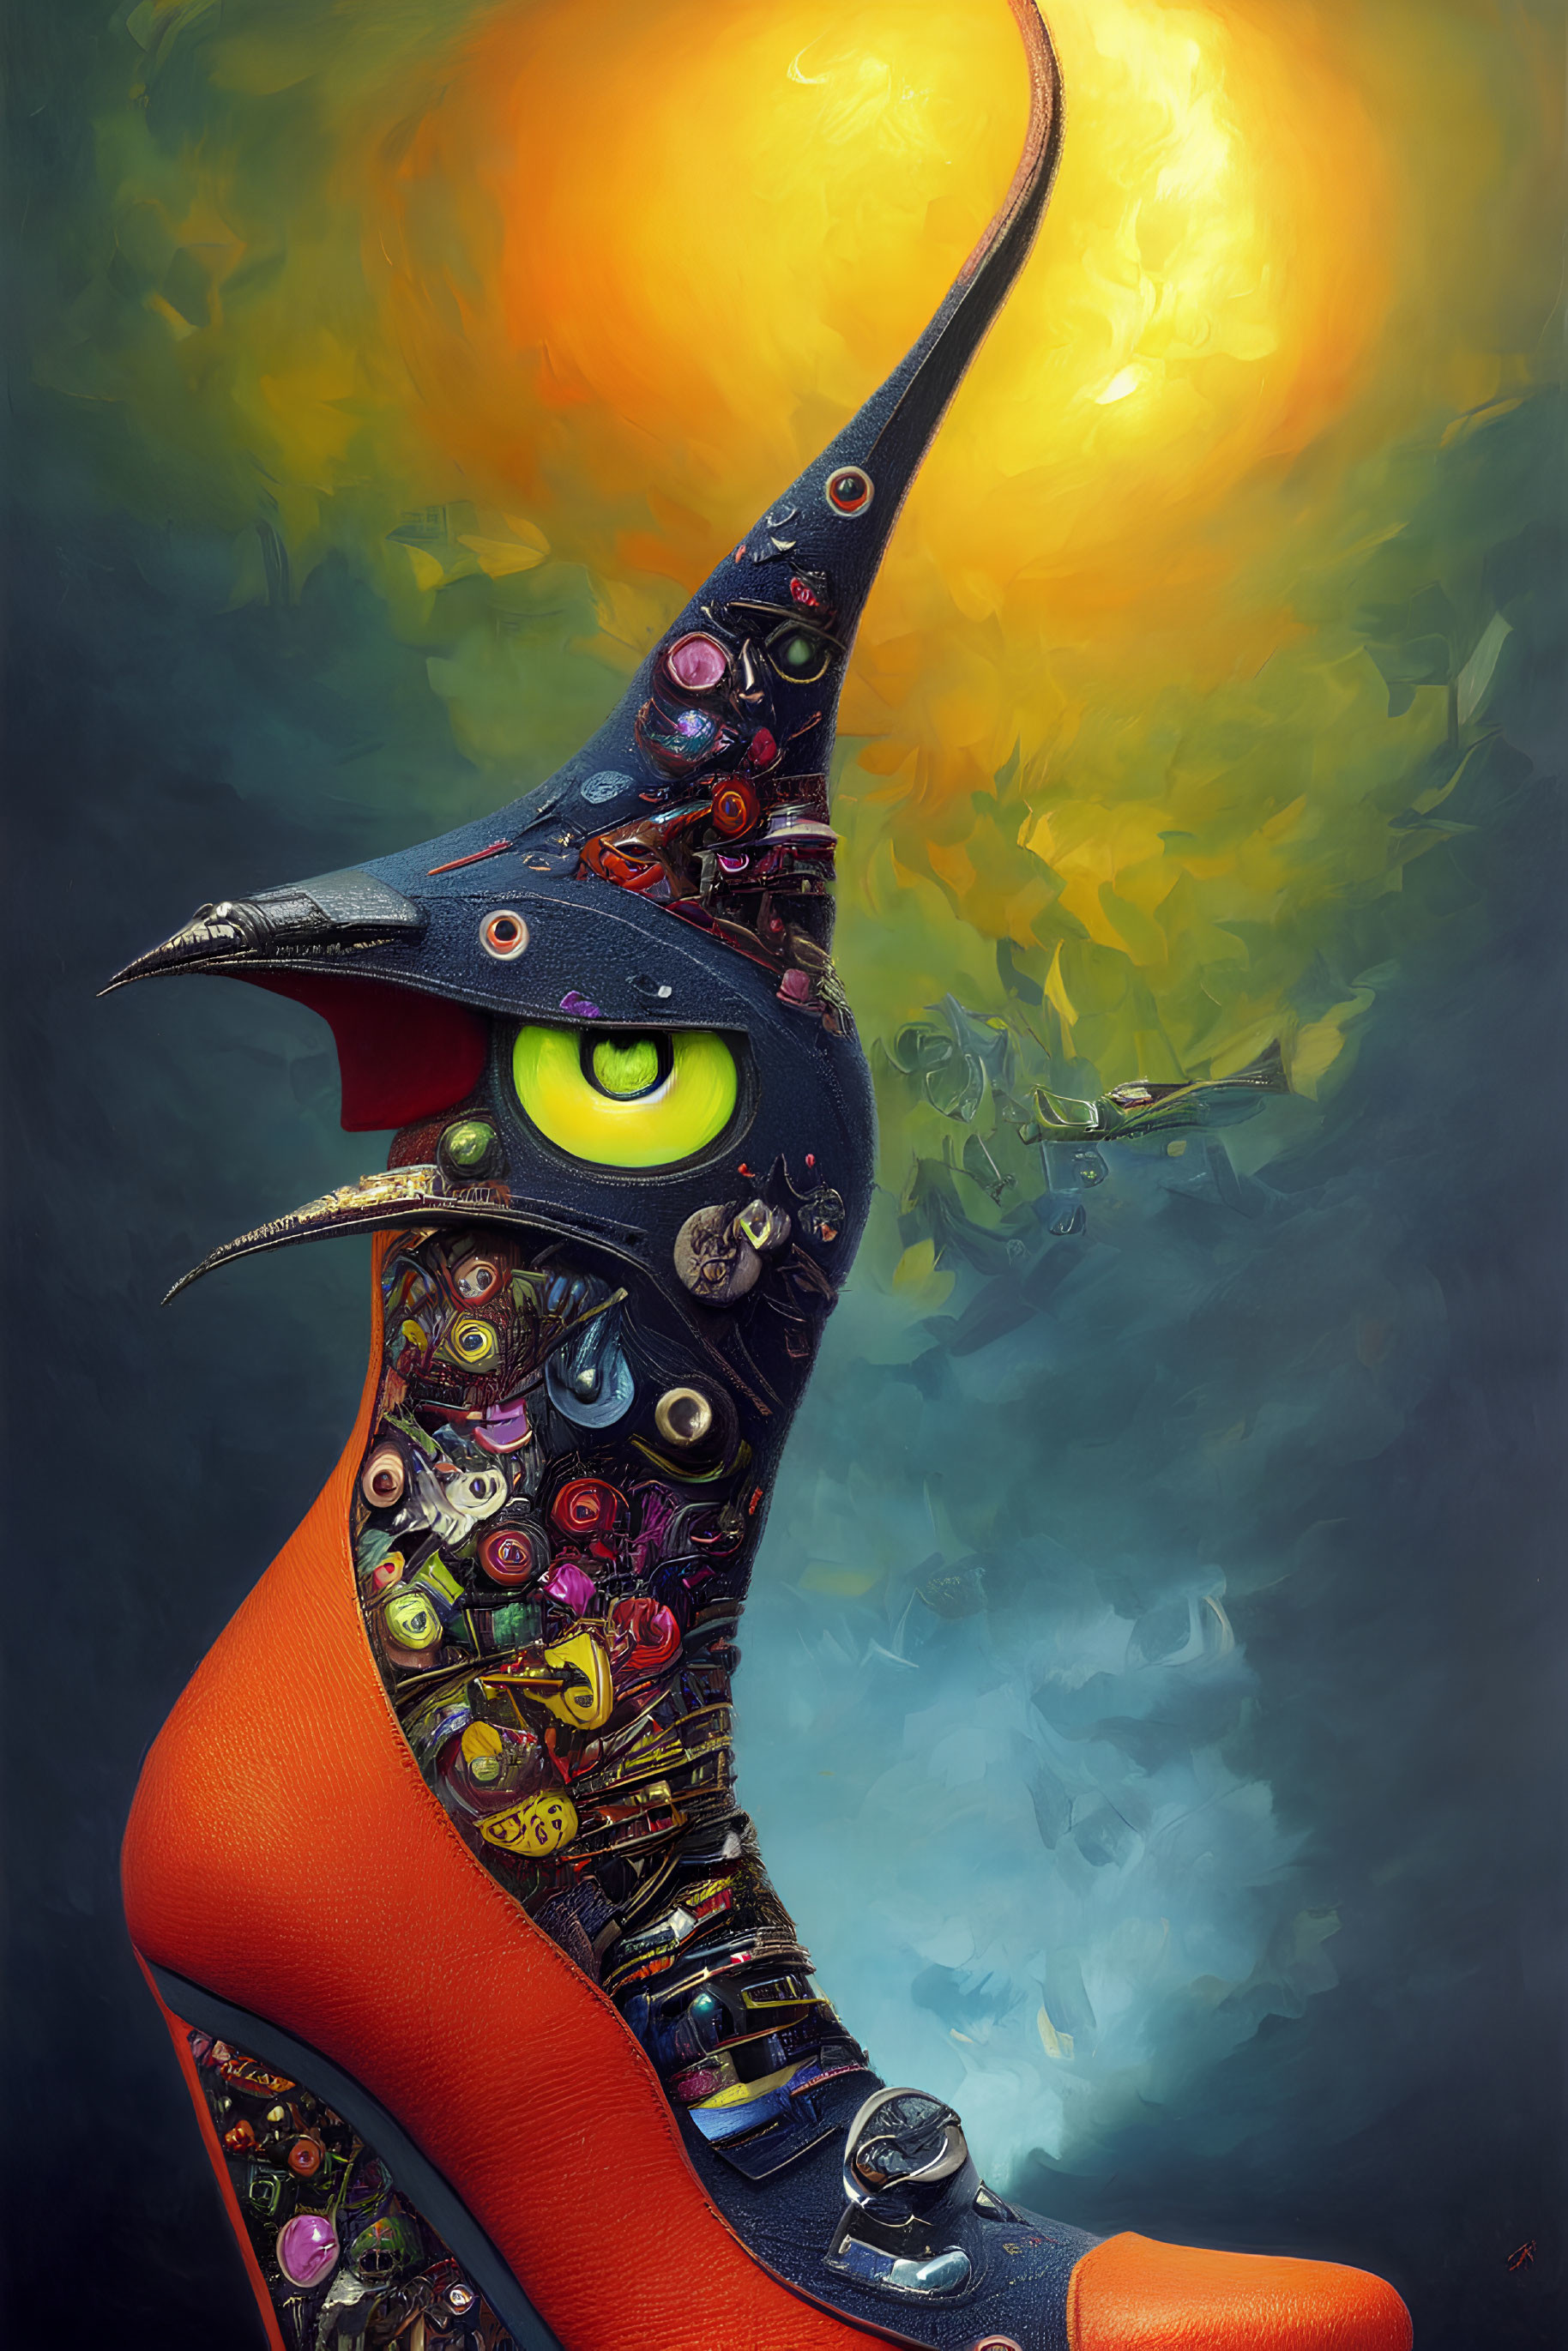 Colorful Creature with Long Beaked Mask in Vibrant Setting